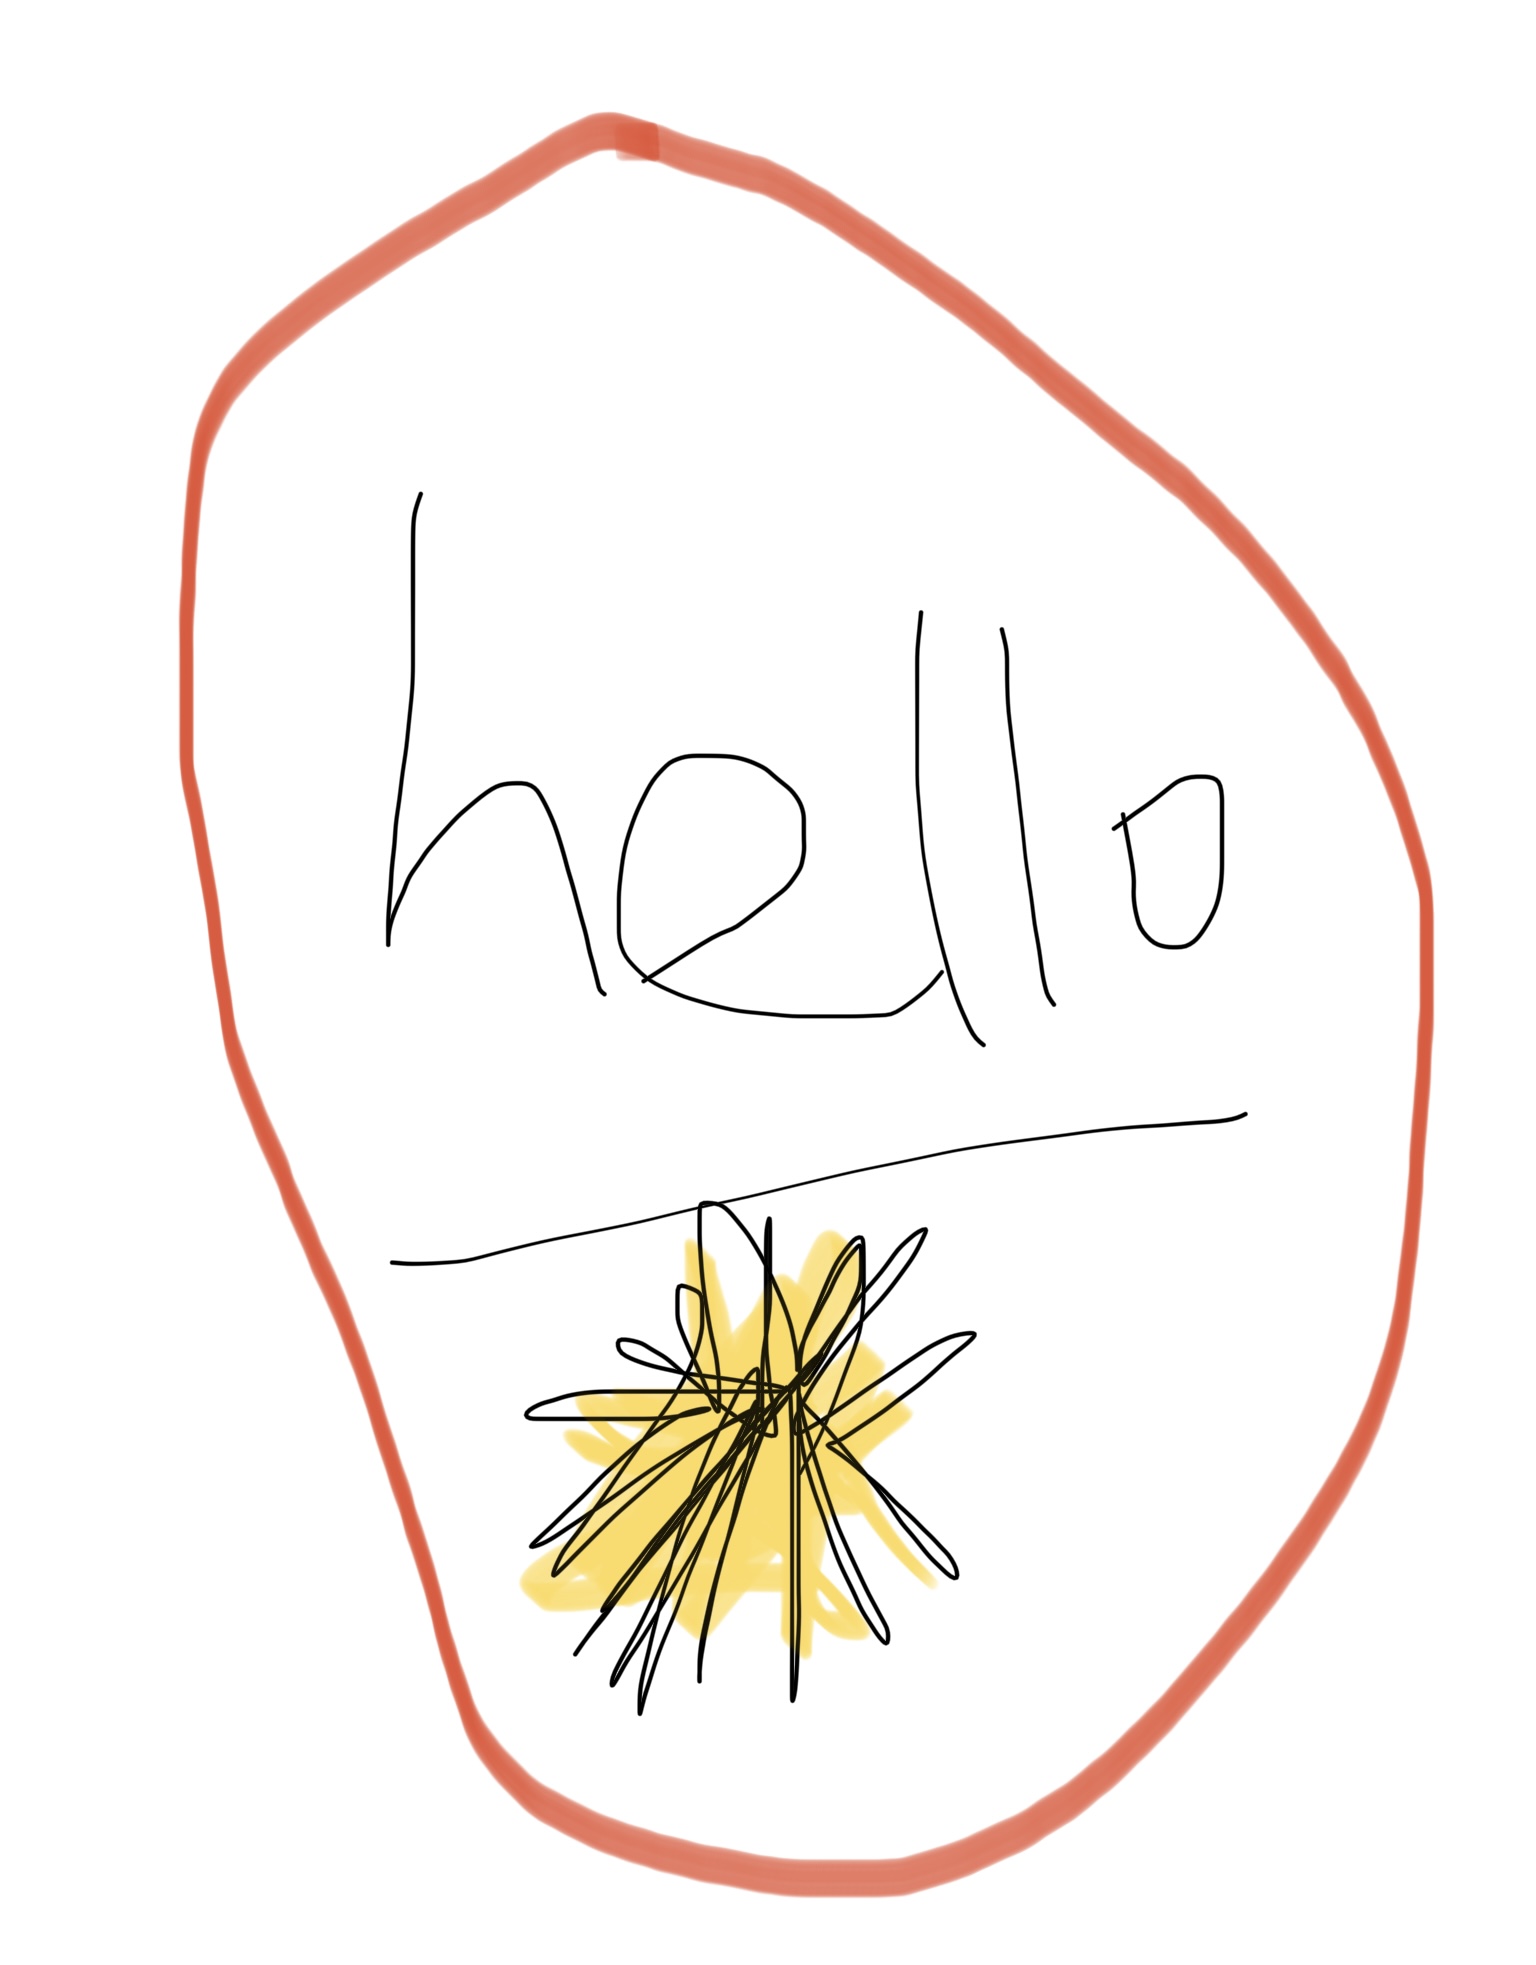 A yellow hand drawn star, above which is the word “hello”, handwritten. The entire thing is encircled with a hand drawn red oval